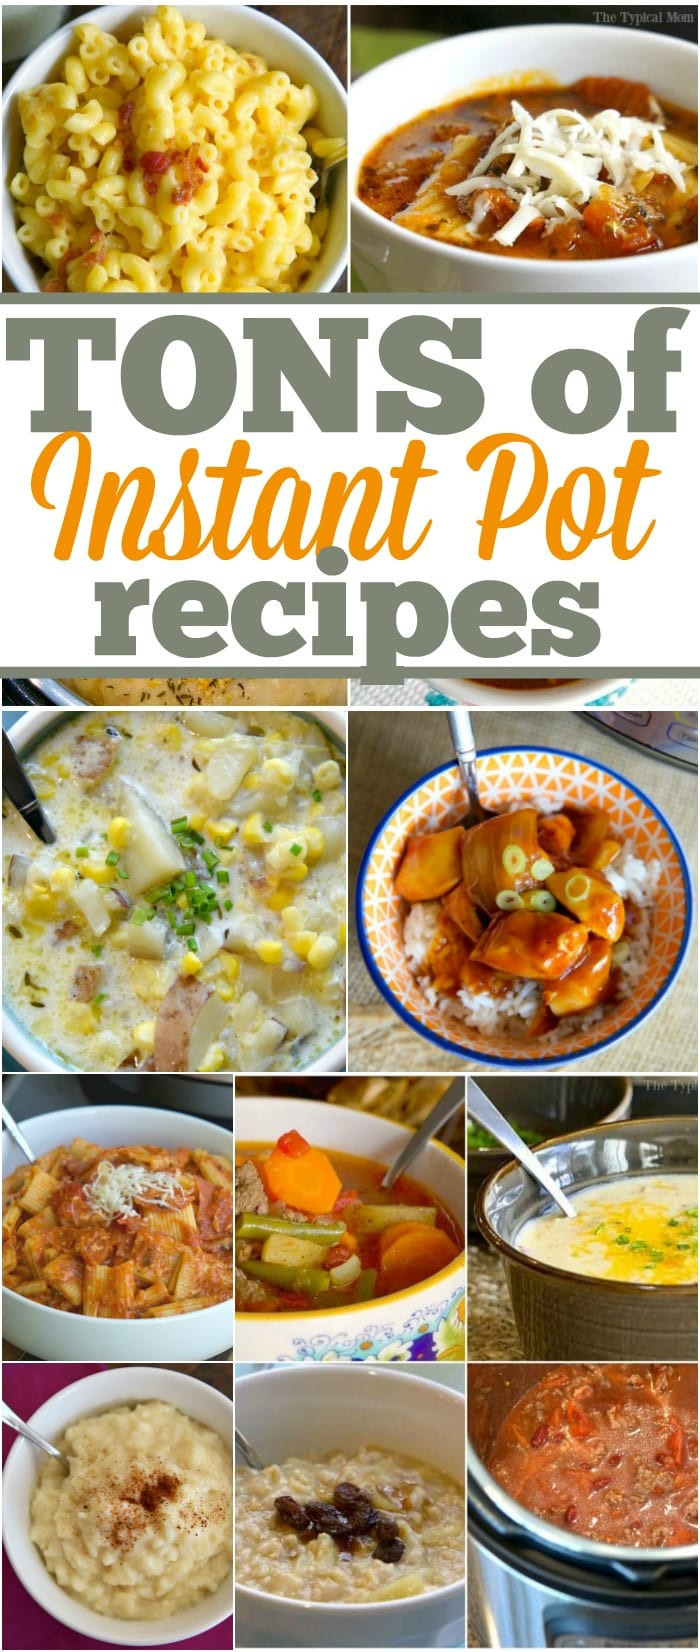 Instant Pot Best Recipes
 101 Instant Pot Recipes Step by Step Instructional Videos